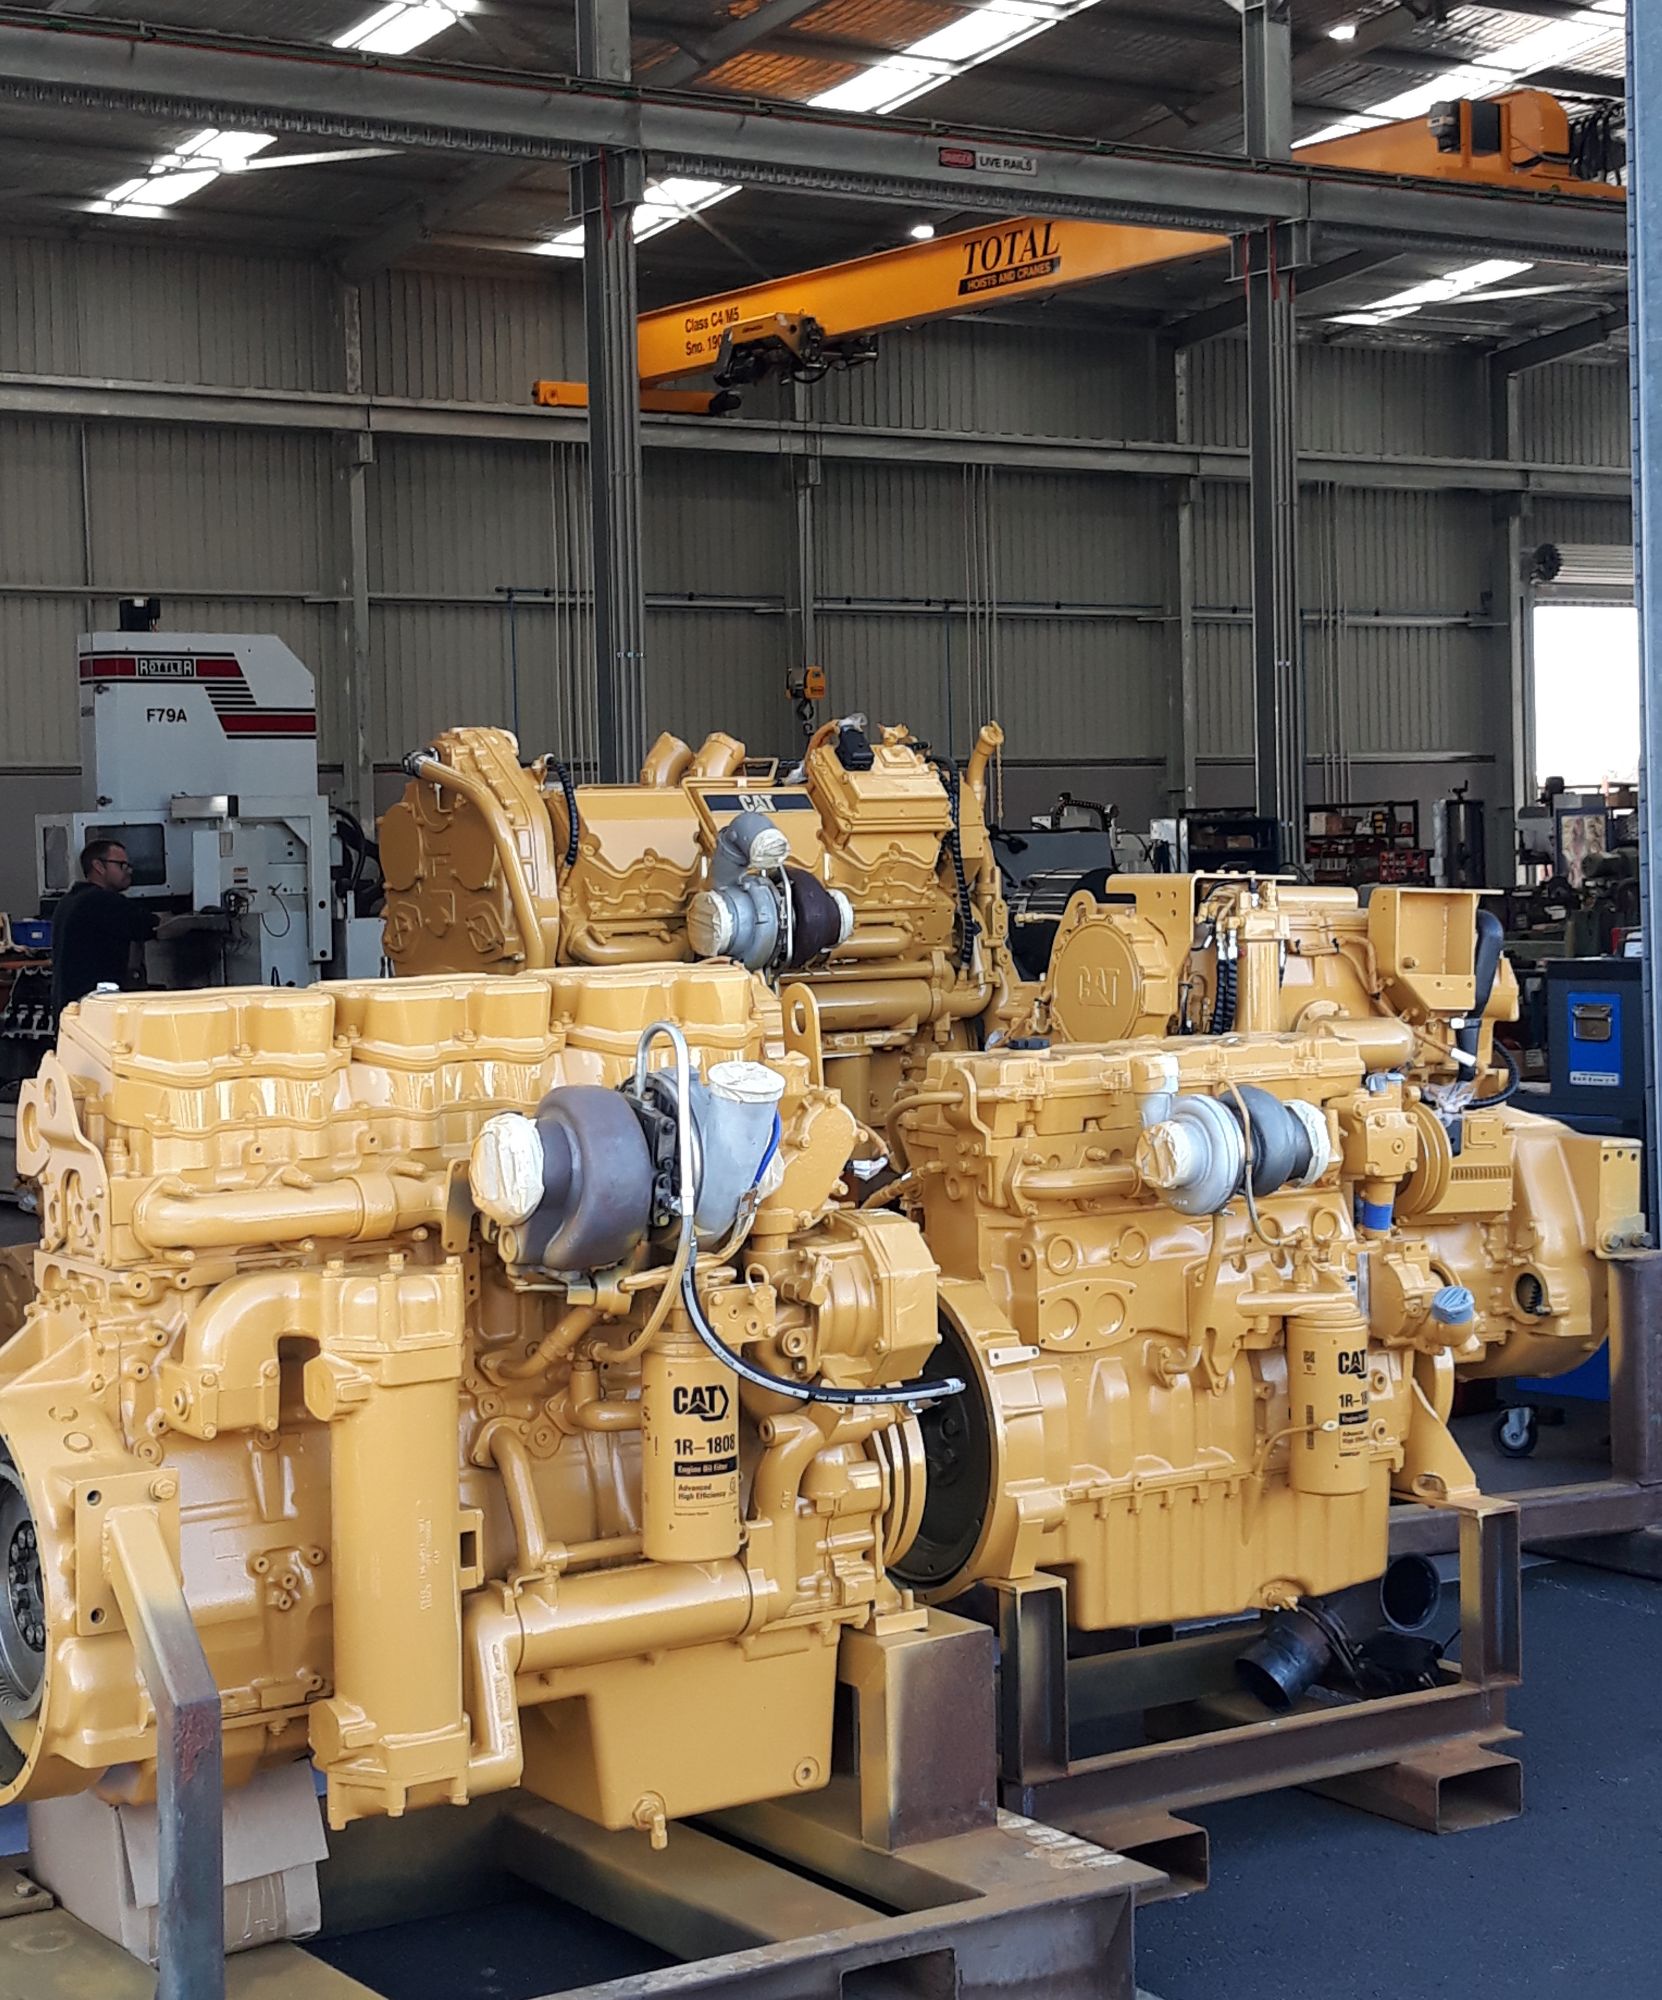 CaterpillarÂ® Reconditioned Engines for sale throughout Australia